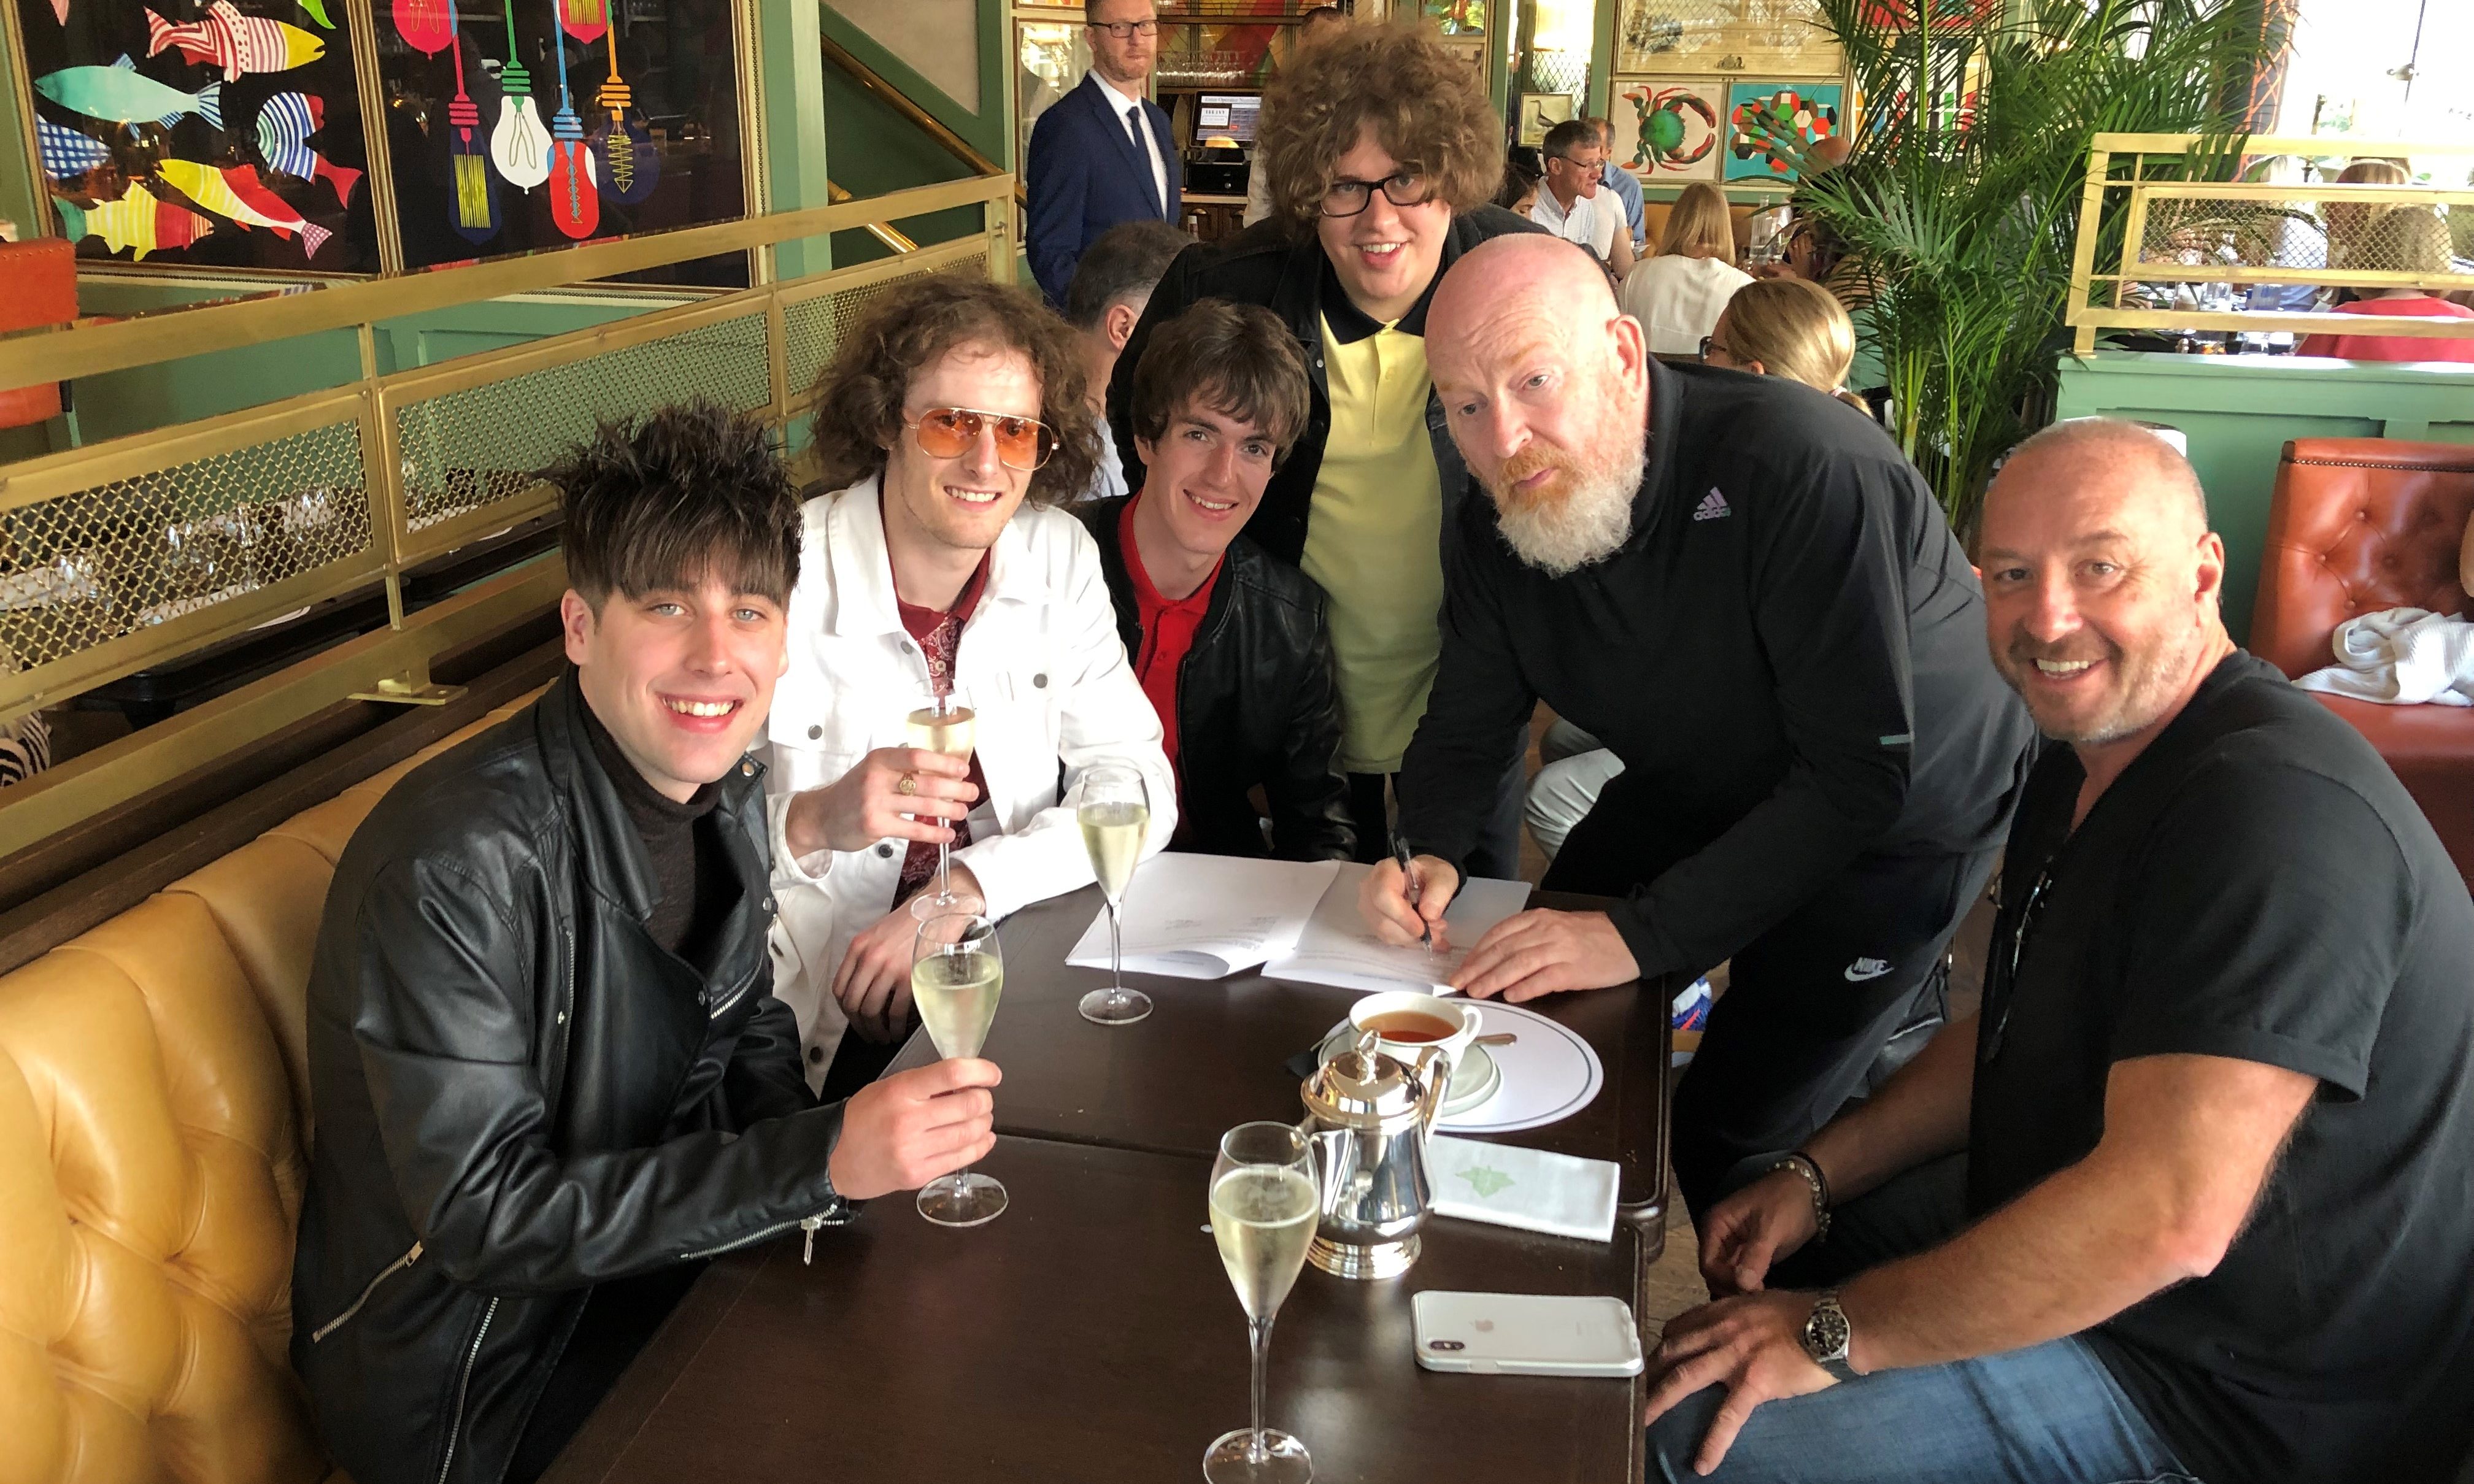 Fife band Shambolics have signed to Creation 23 - the new record label set up by music mogul Alan McGee.
(from left) Jordan McHatton,  Darren Forbes, Lewis McDonald, Alan McGee, Jake Bain and Simon Fletcher